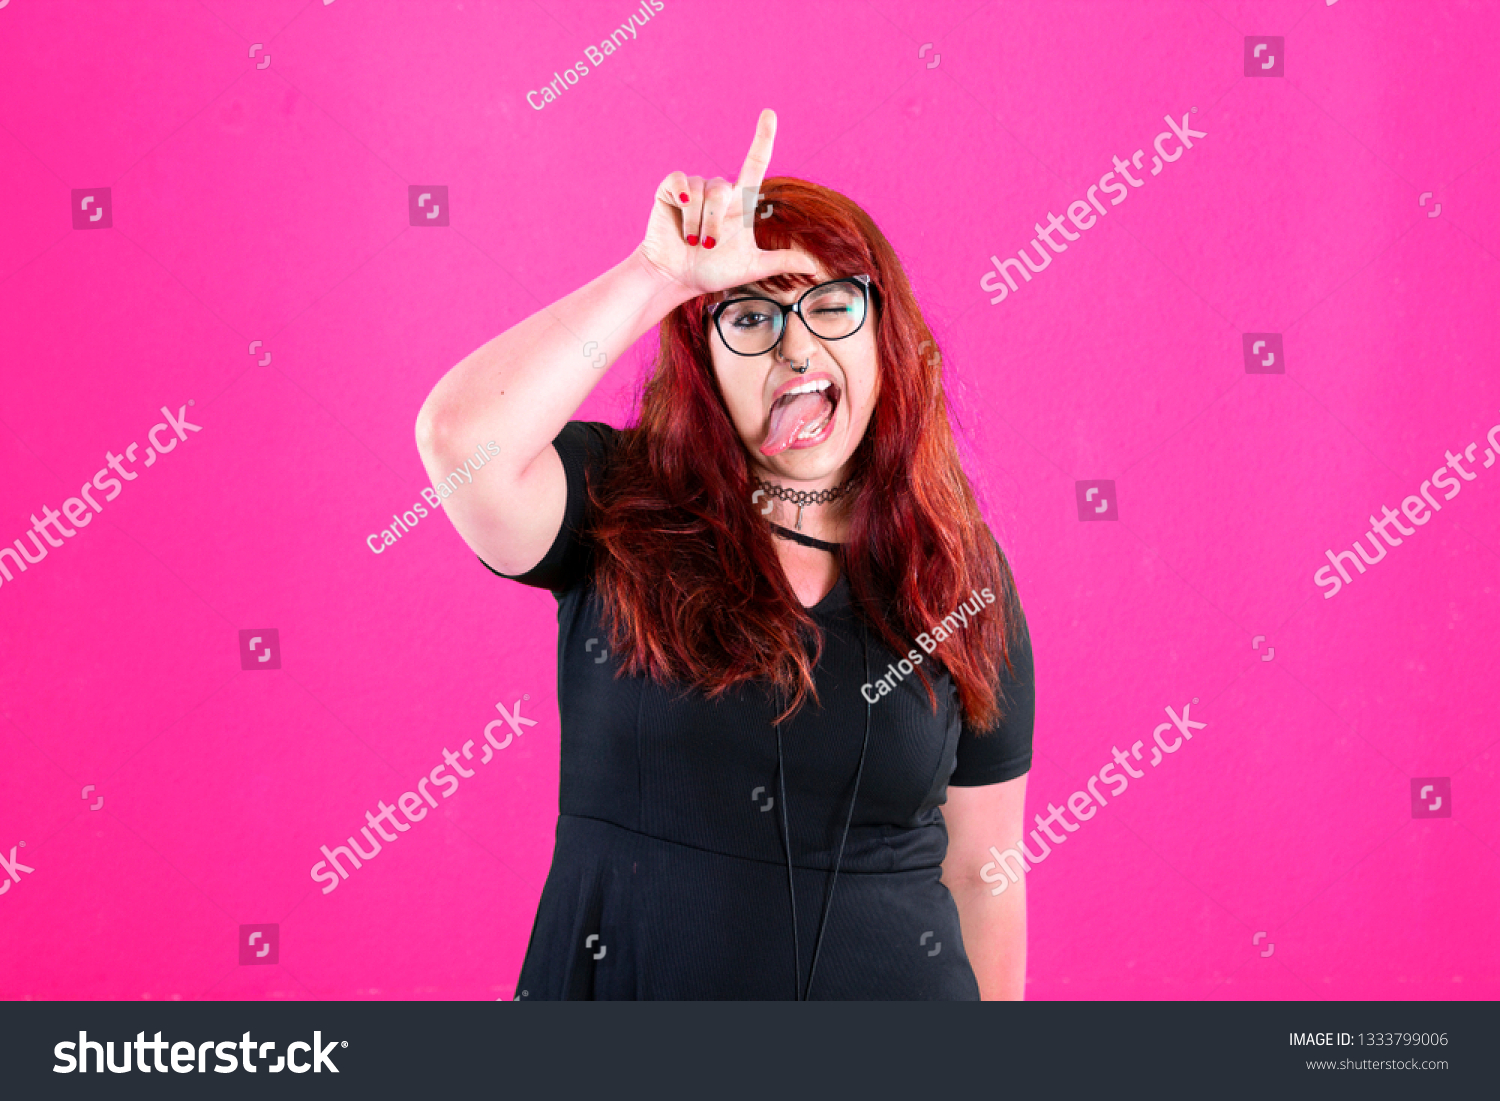 You are outsider. Studio shot of annoyed good-looking woman, feeling cool and confident while tilting head and showing loser-sign over forehead #1333799006